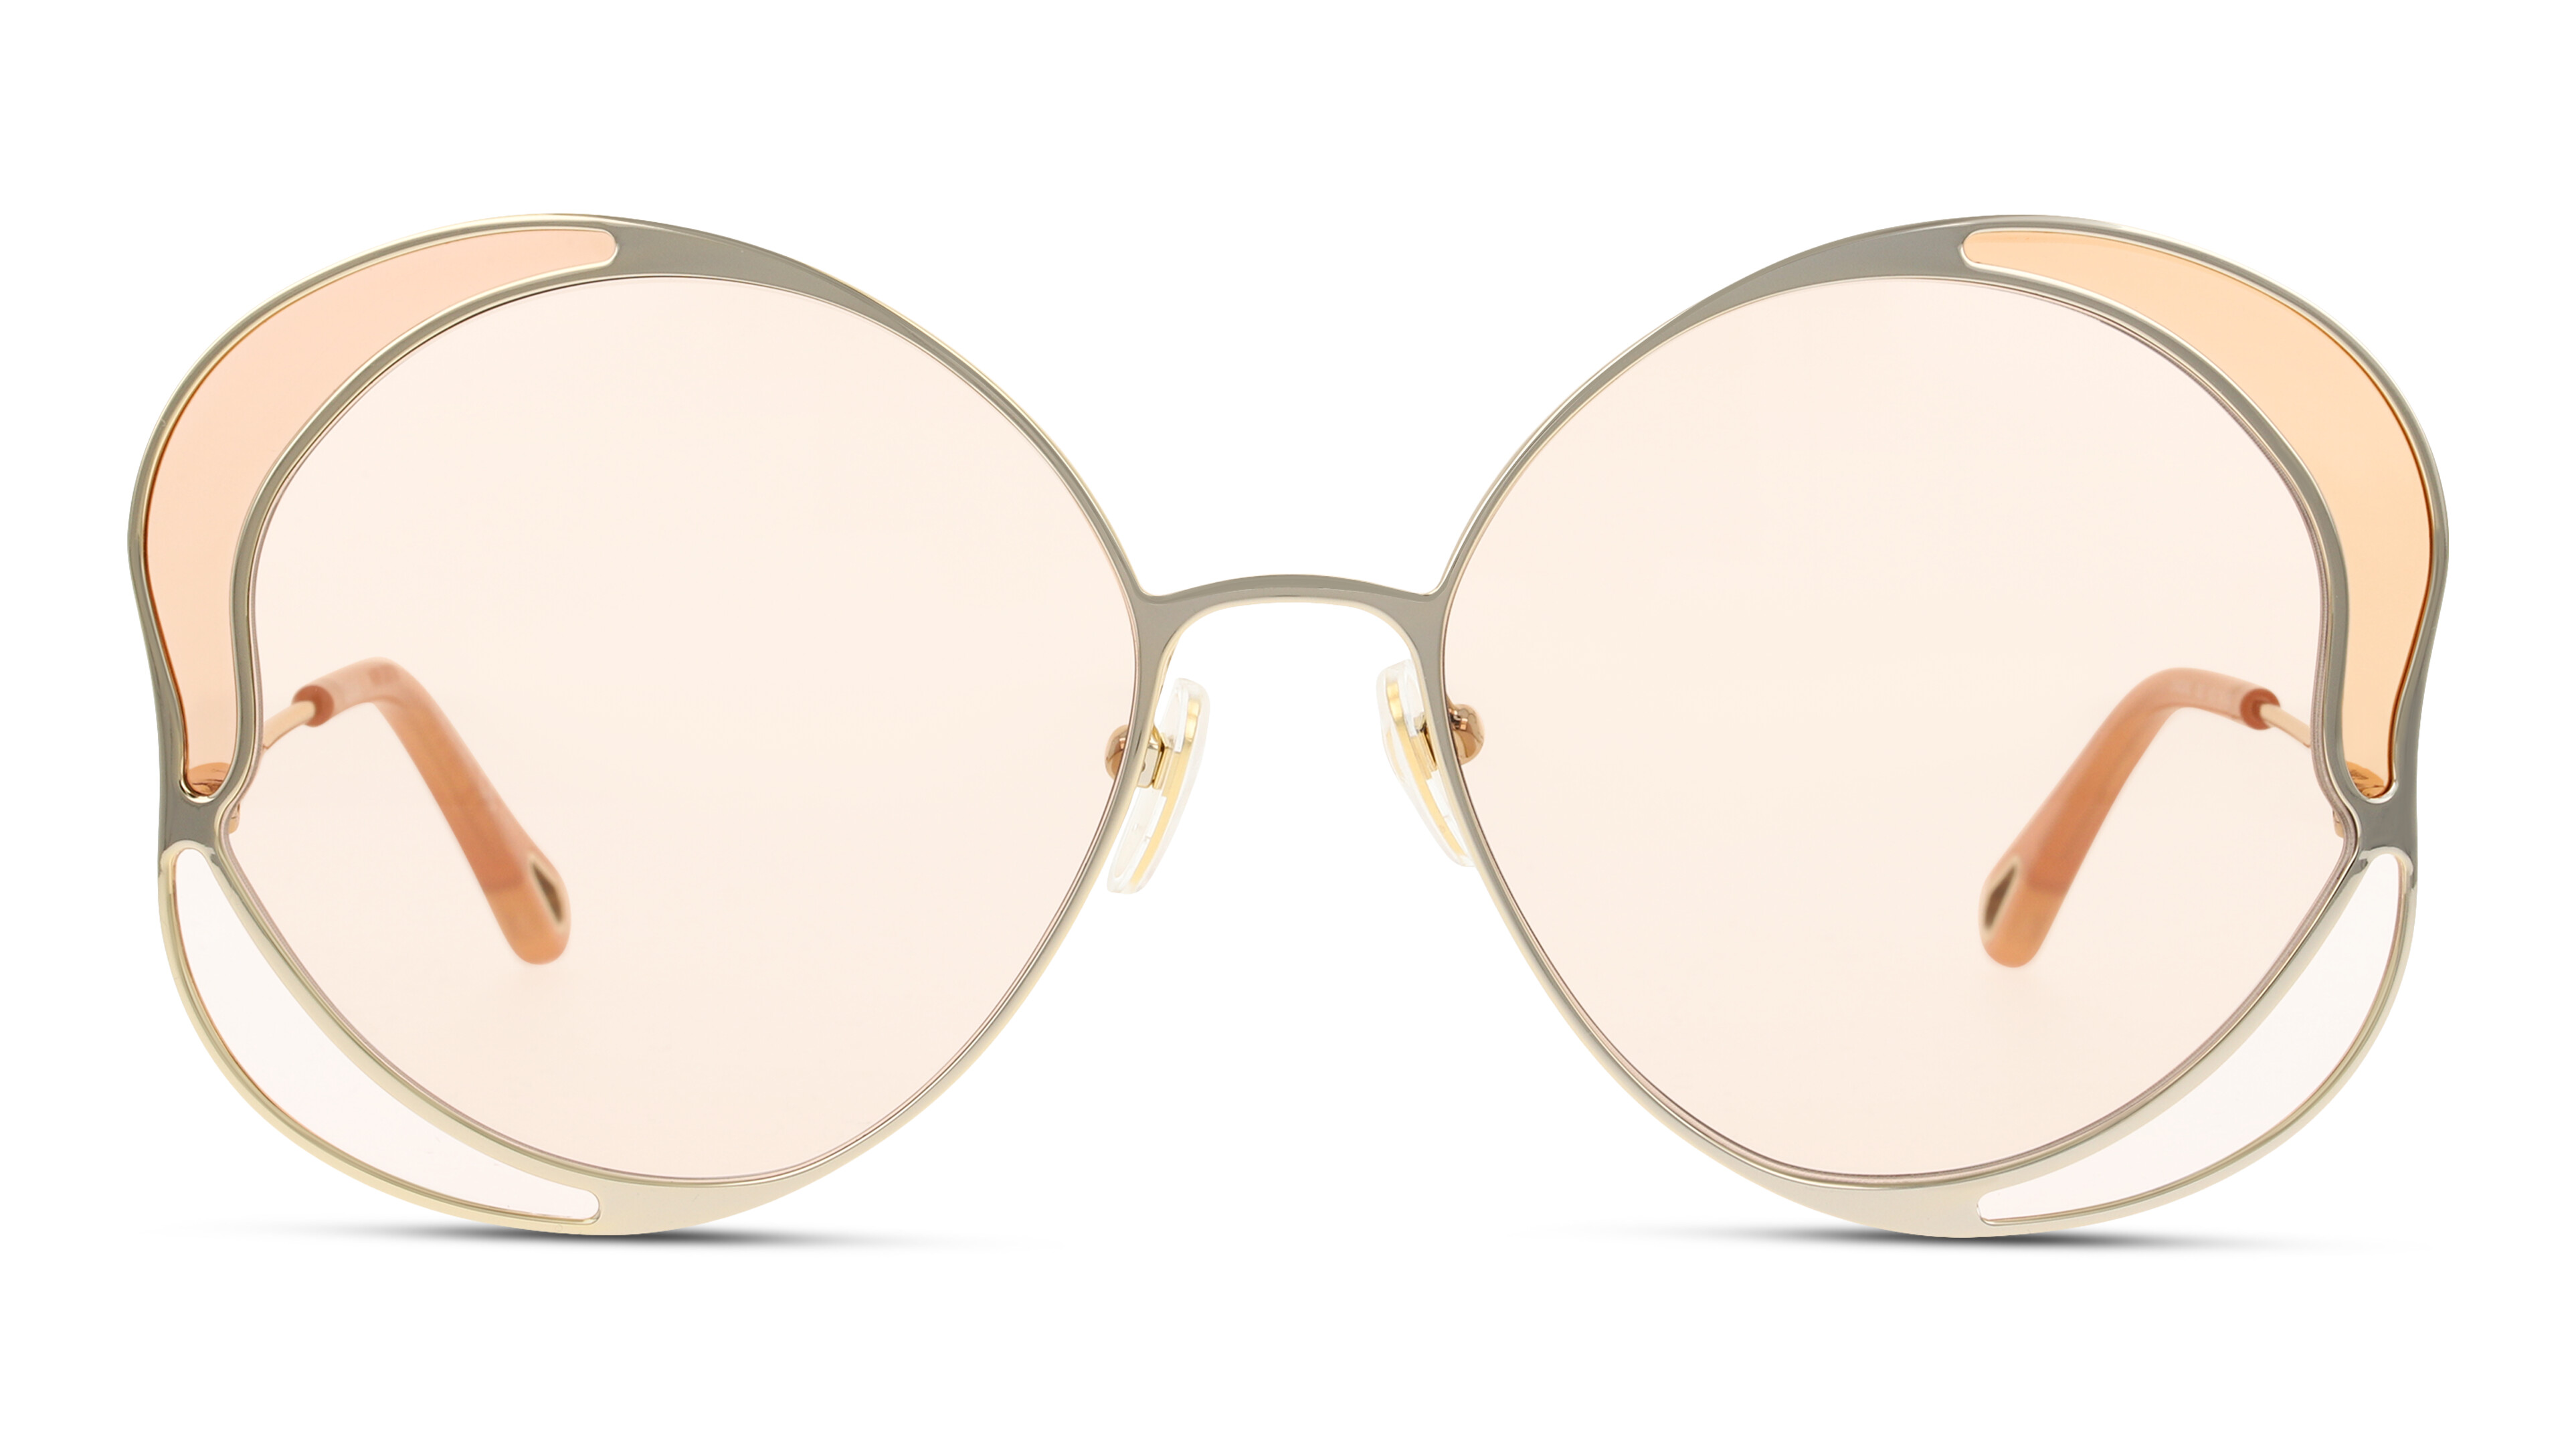 [products.image.front] Chloe CH0024S 003 Sonnenbrille